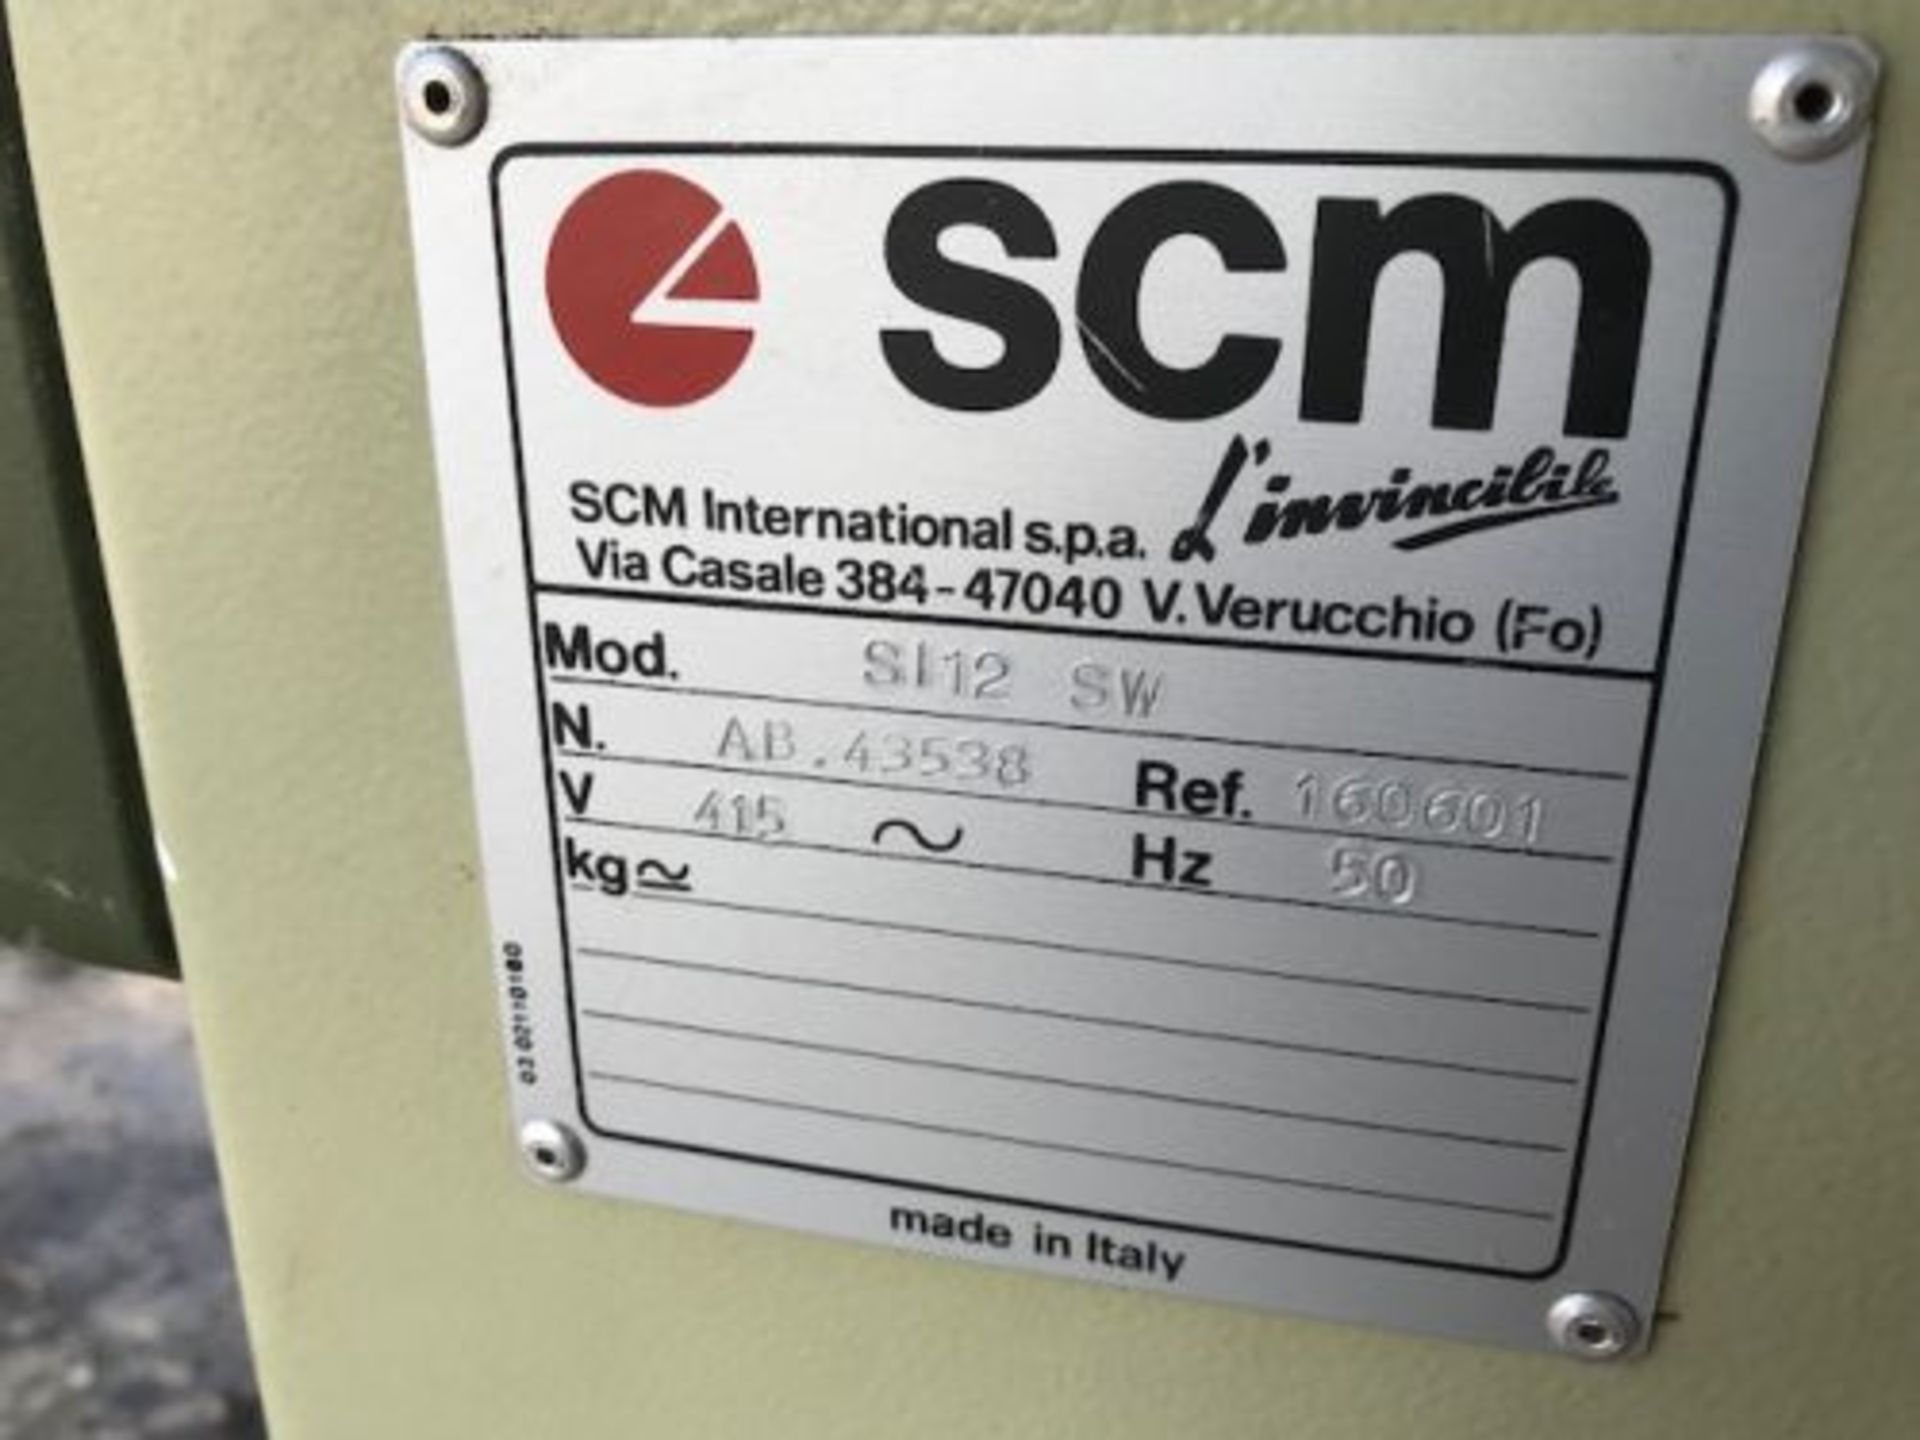 SCM SI 12 Invincible Panel Saw, with 4kW motor - Image 5 of 8